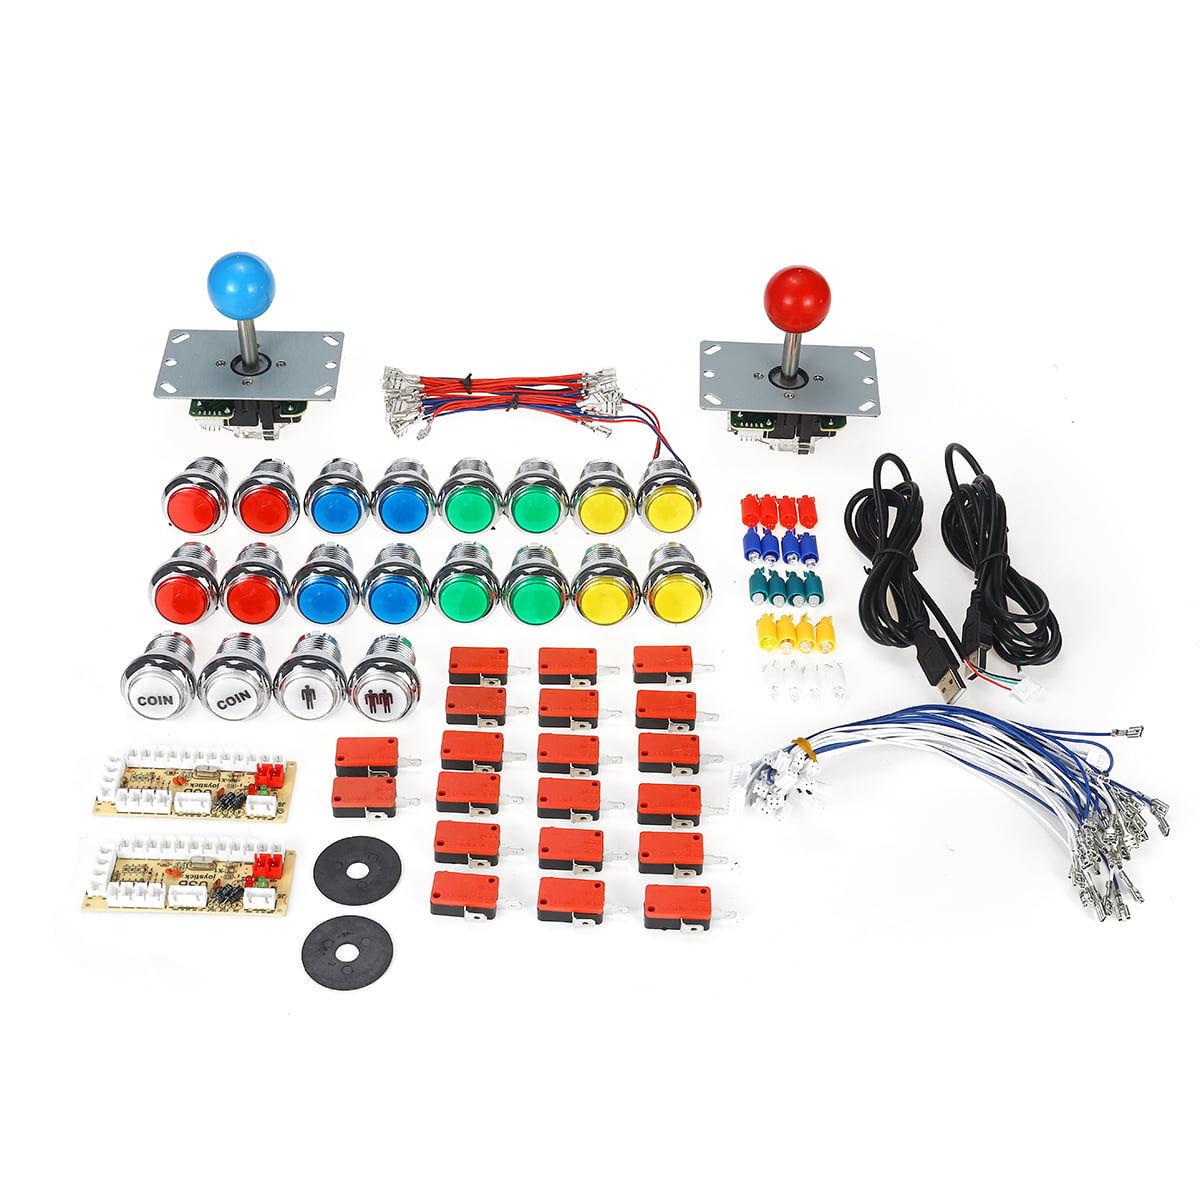 Hikig 2 Player led Arcade Buttons and joysticks DIY kit 2X joysticks 20x led Arcade Buttons Game Controller kit for MAME and Raspberry Pi Red Blue Color 